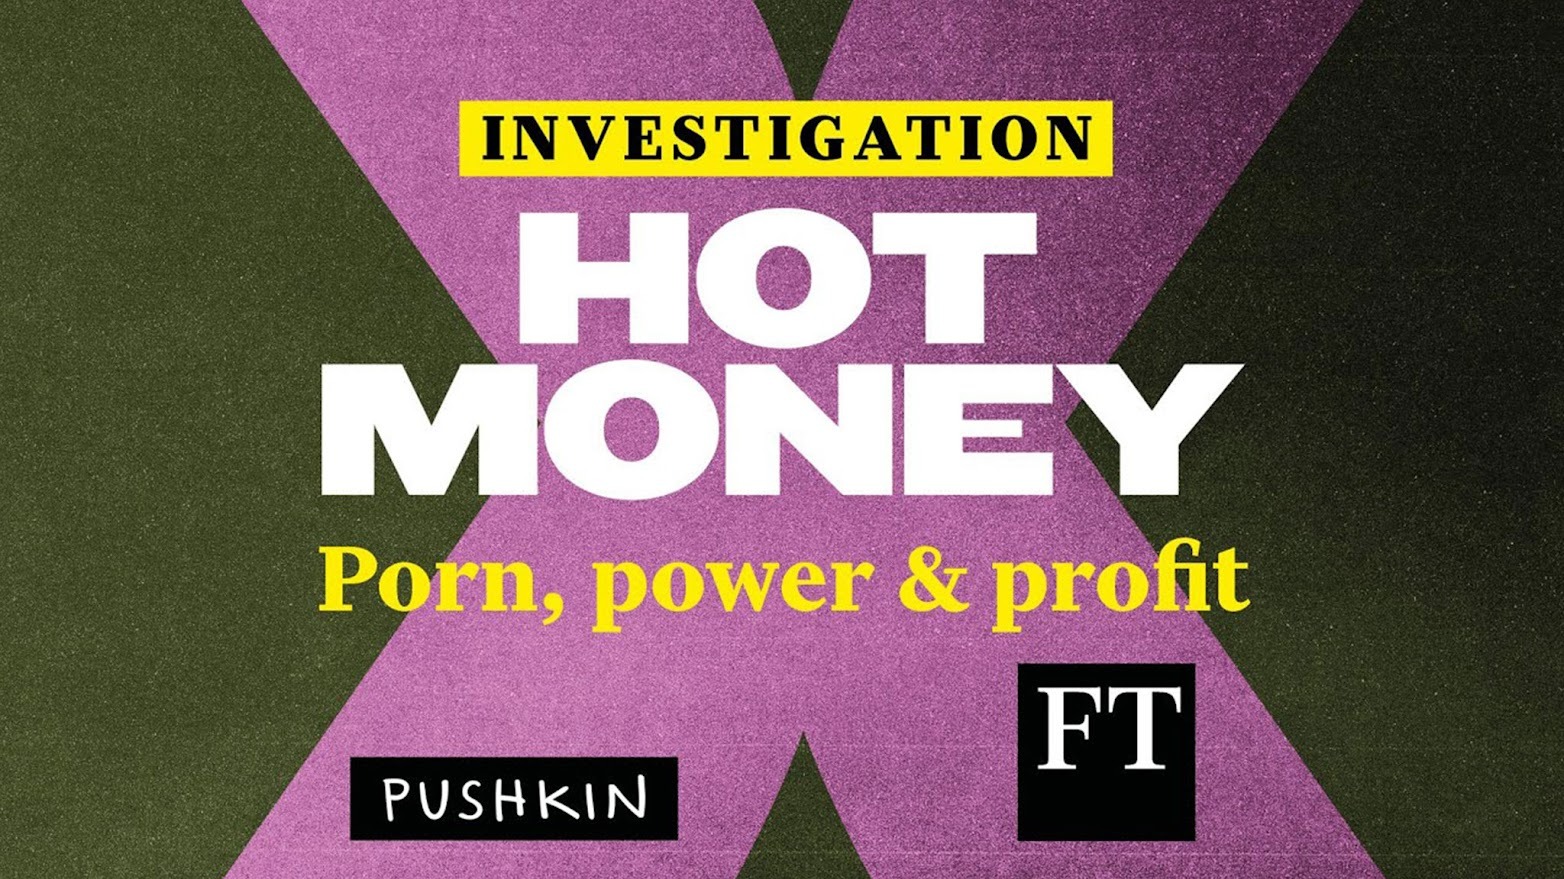 The billionaire who took down porn | Financial Times